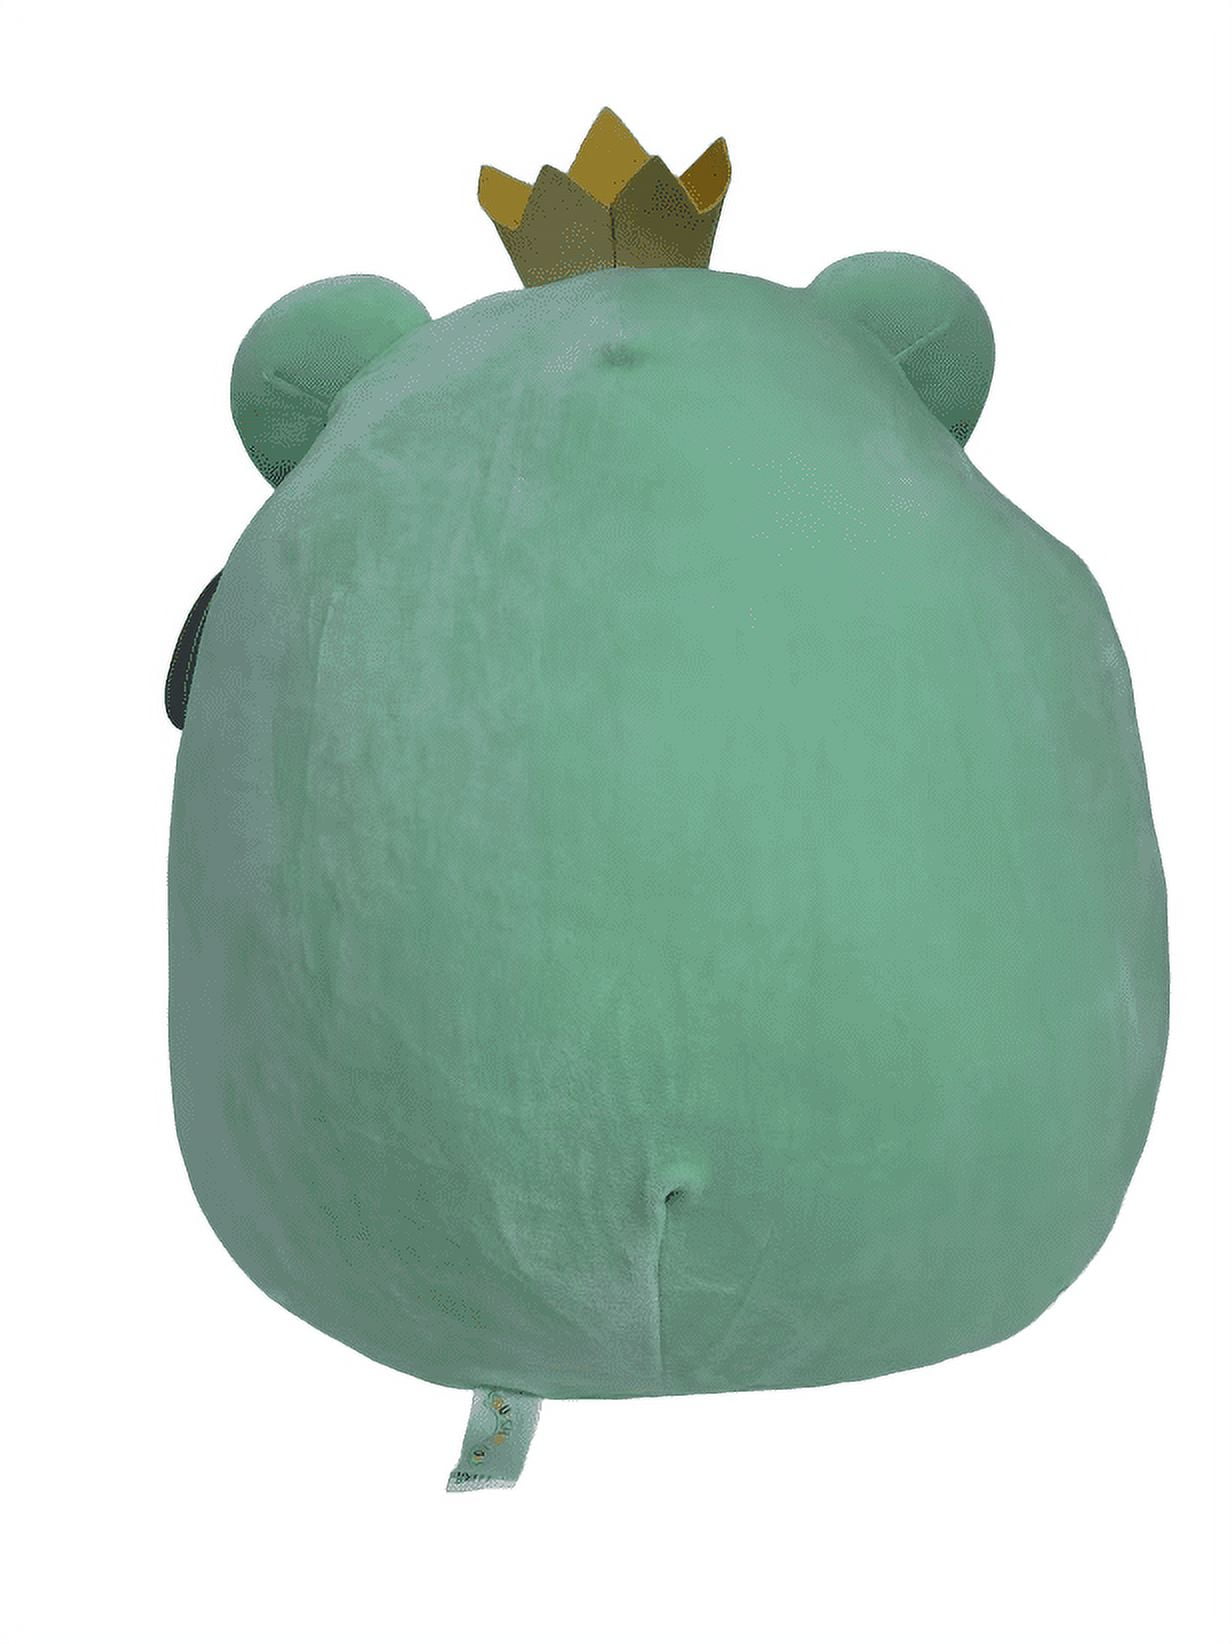  SQUISHMALLOW KellyToys - 12 Inch (30cm) - Wendy The Green Frog  from The Floral Squad - Super Soft Plush Toy Animal Pillow Pal Buddy  Stuffed Animal Birthday Gift : Toys & Games